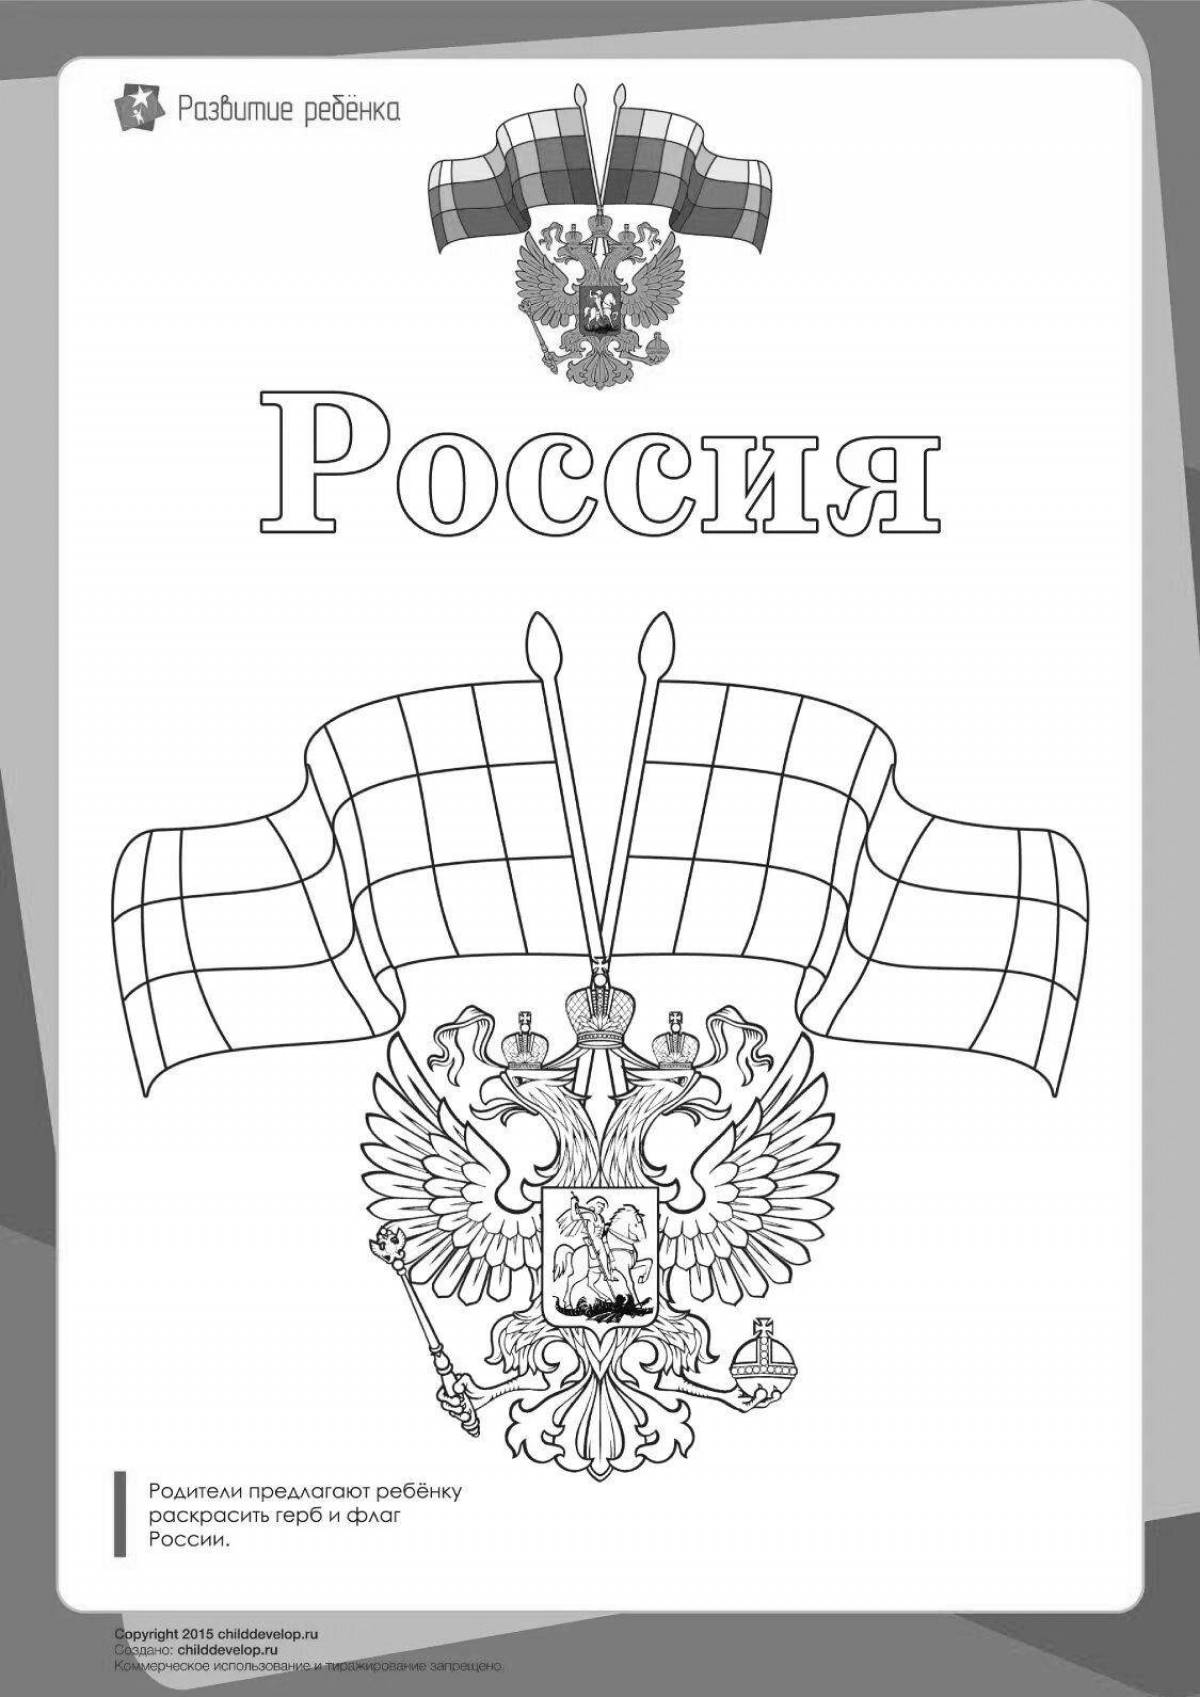 Bright coat of arms of the Russian Federation for children